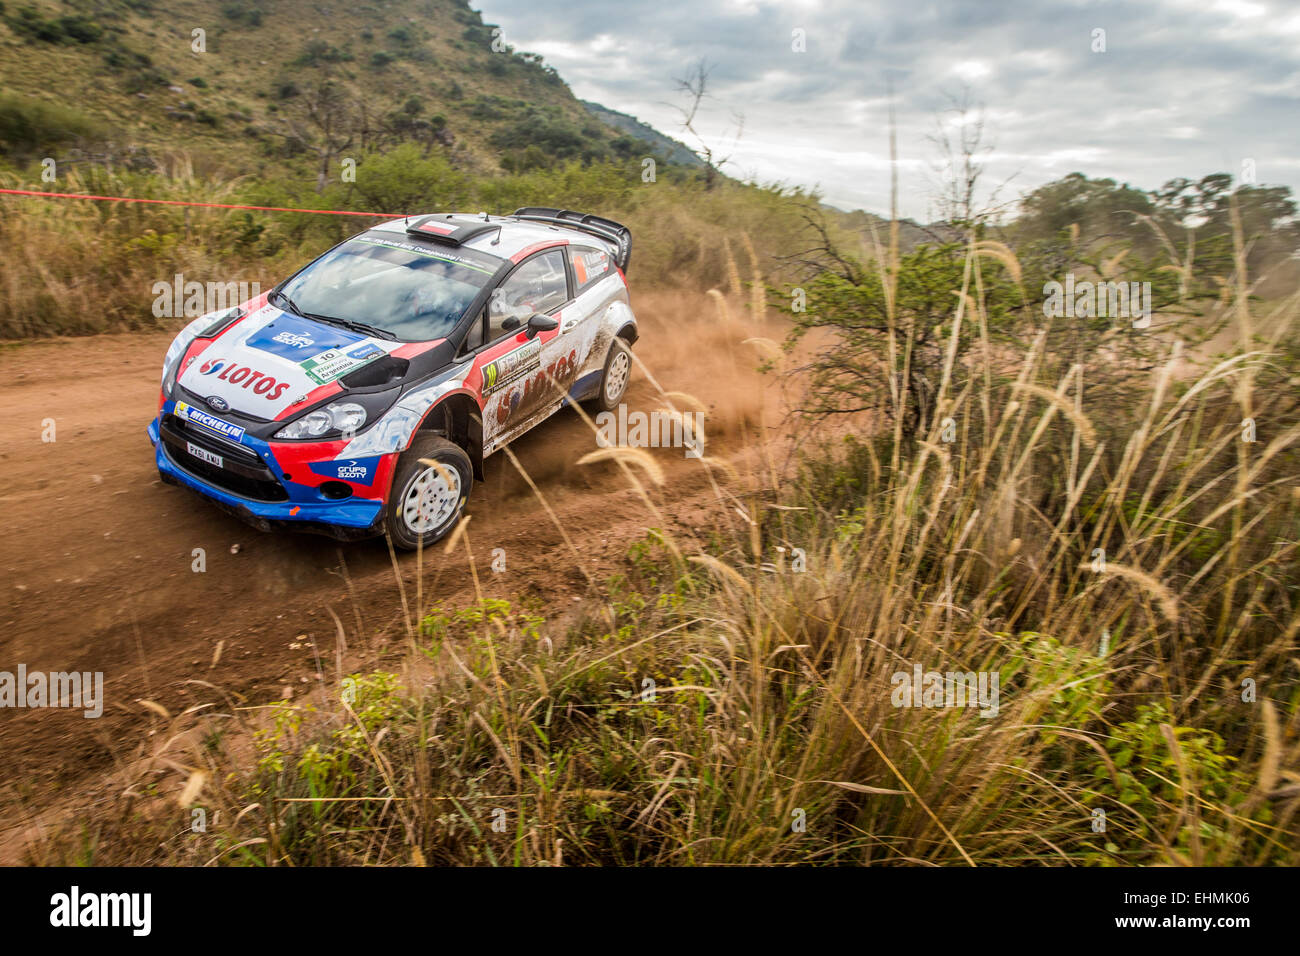 Robert Kubica (POL) of the RK M-Sport World  Rally Team competes in Rally Argentina 2014. by Michael Vettas/Vettas Media Stock Photo